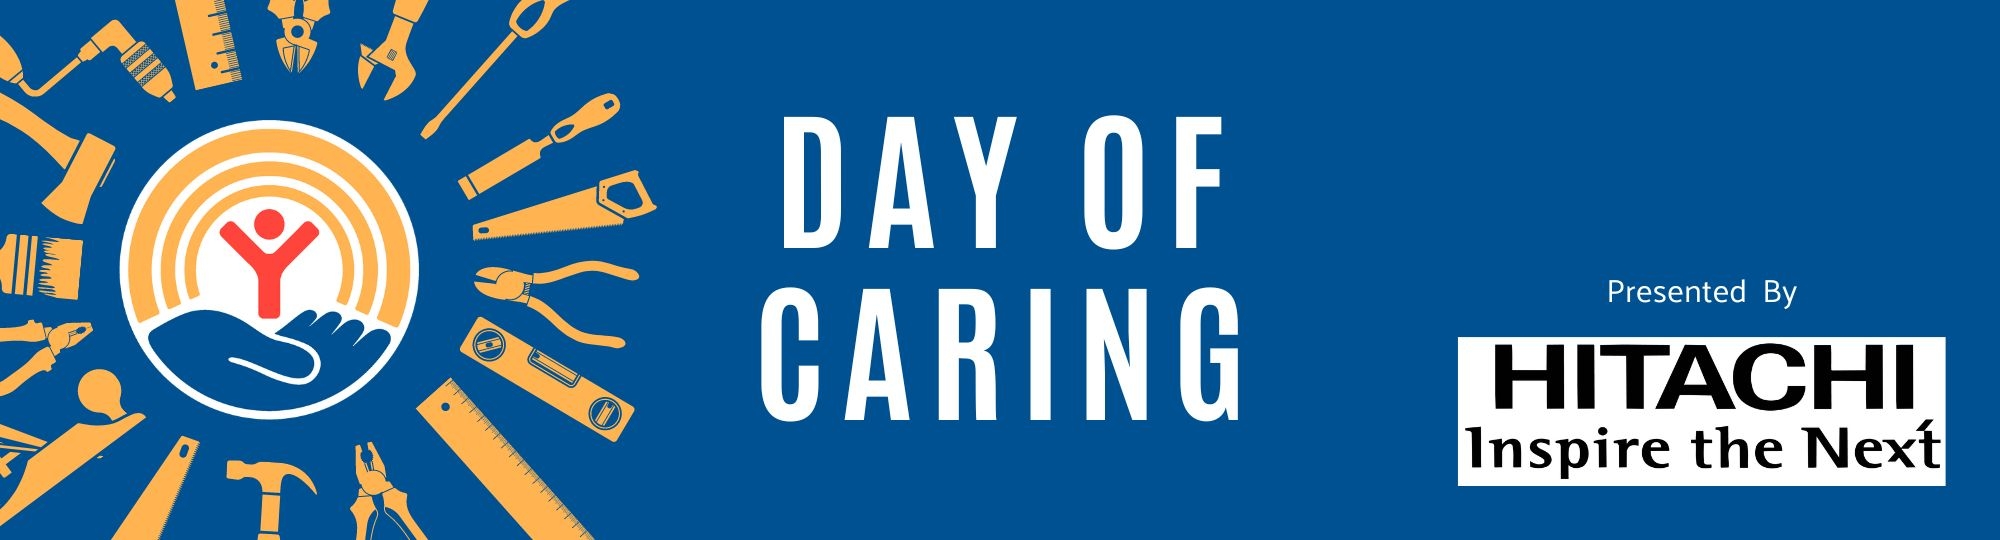 Day of Caring graphic